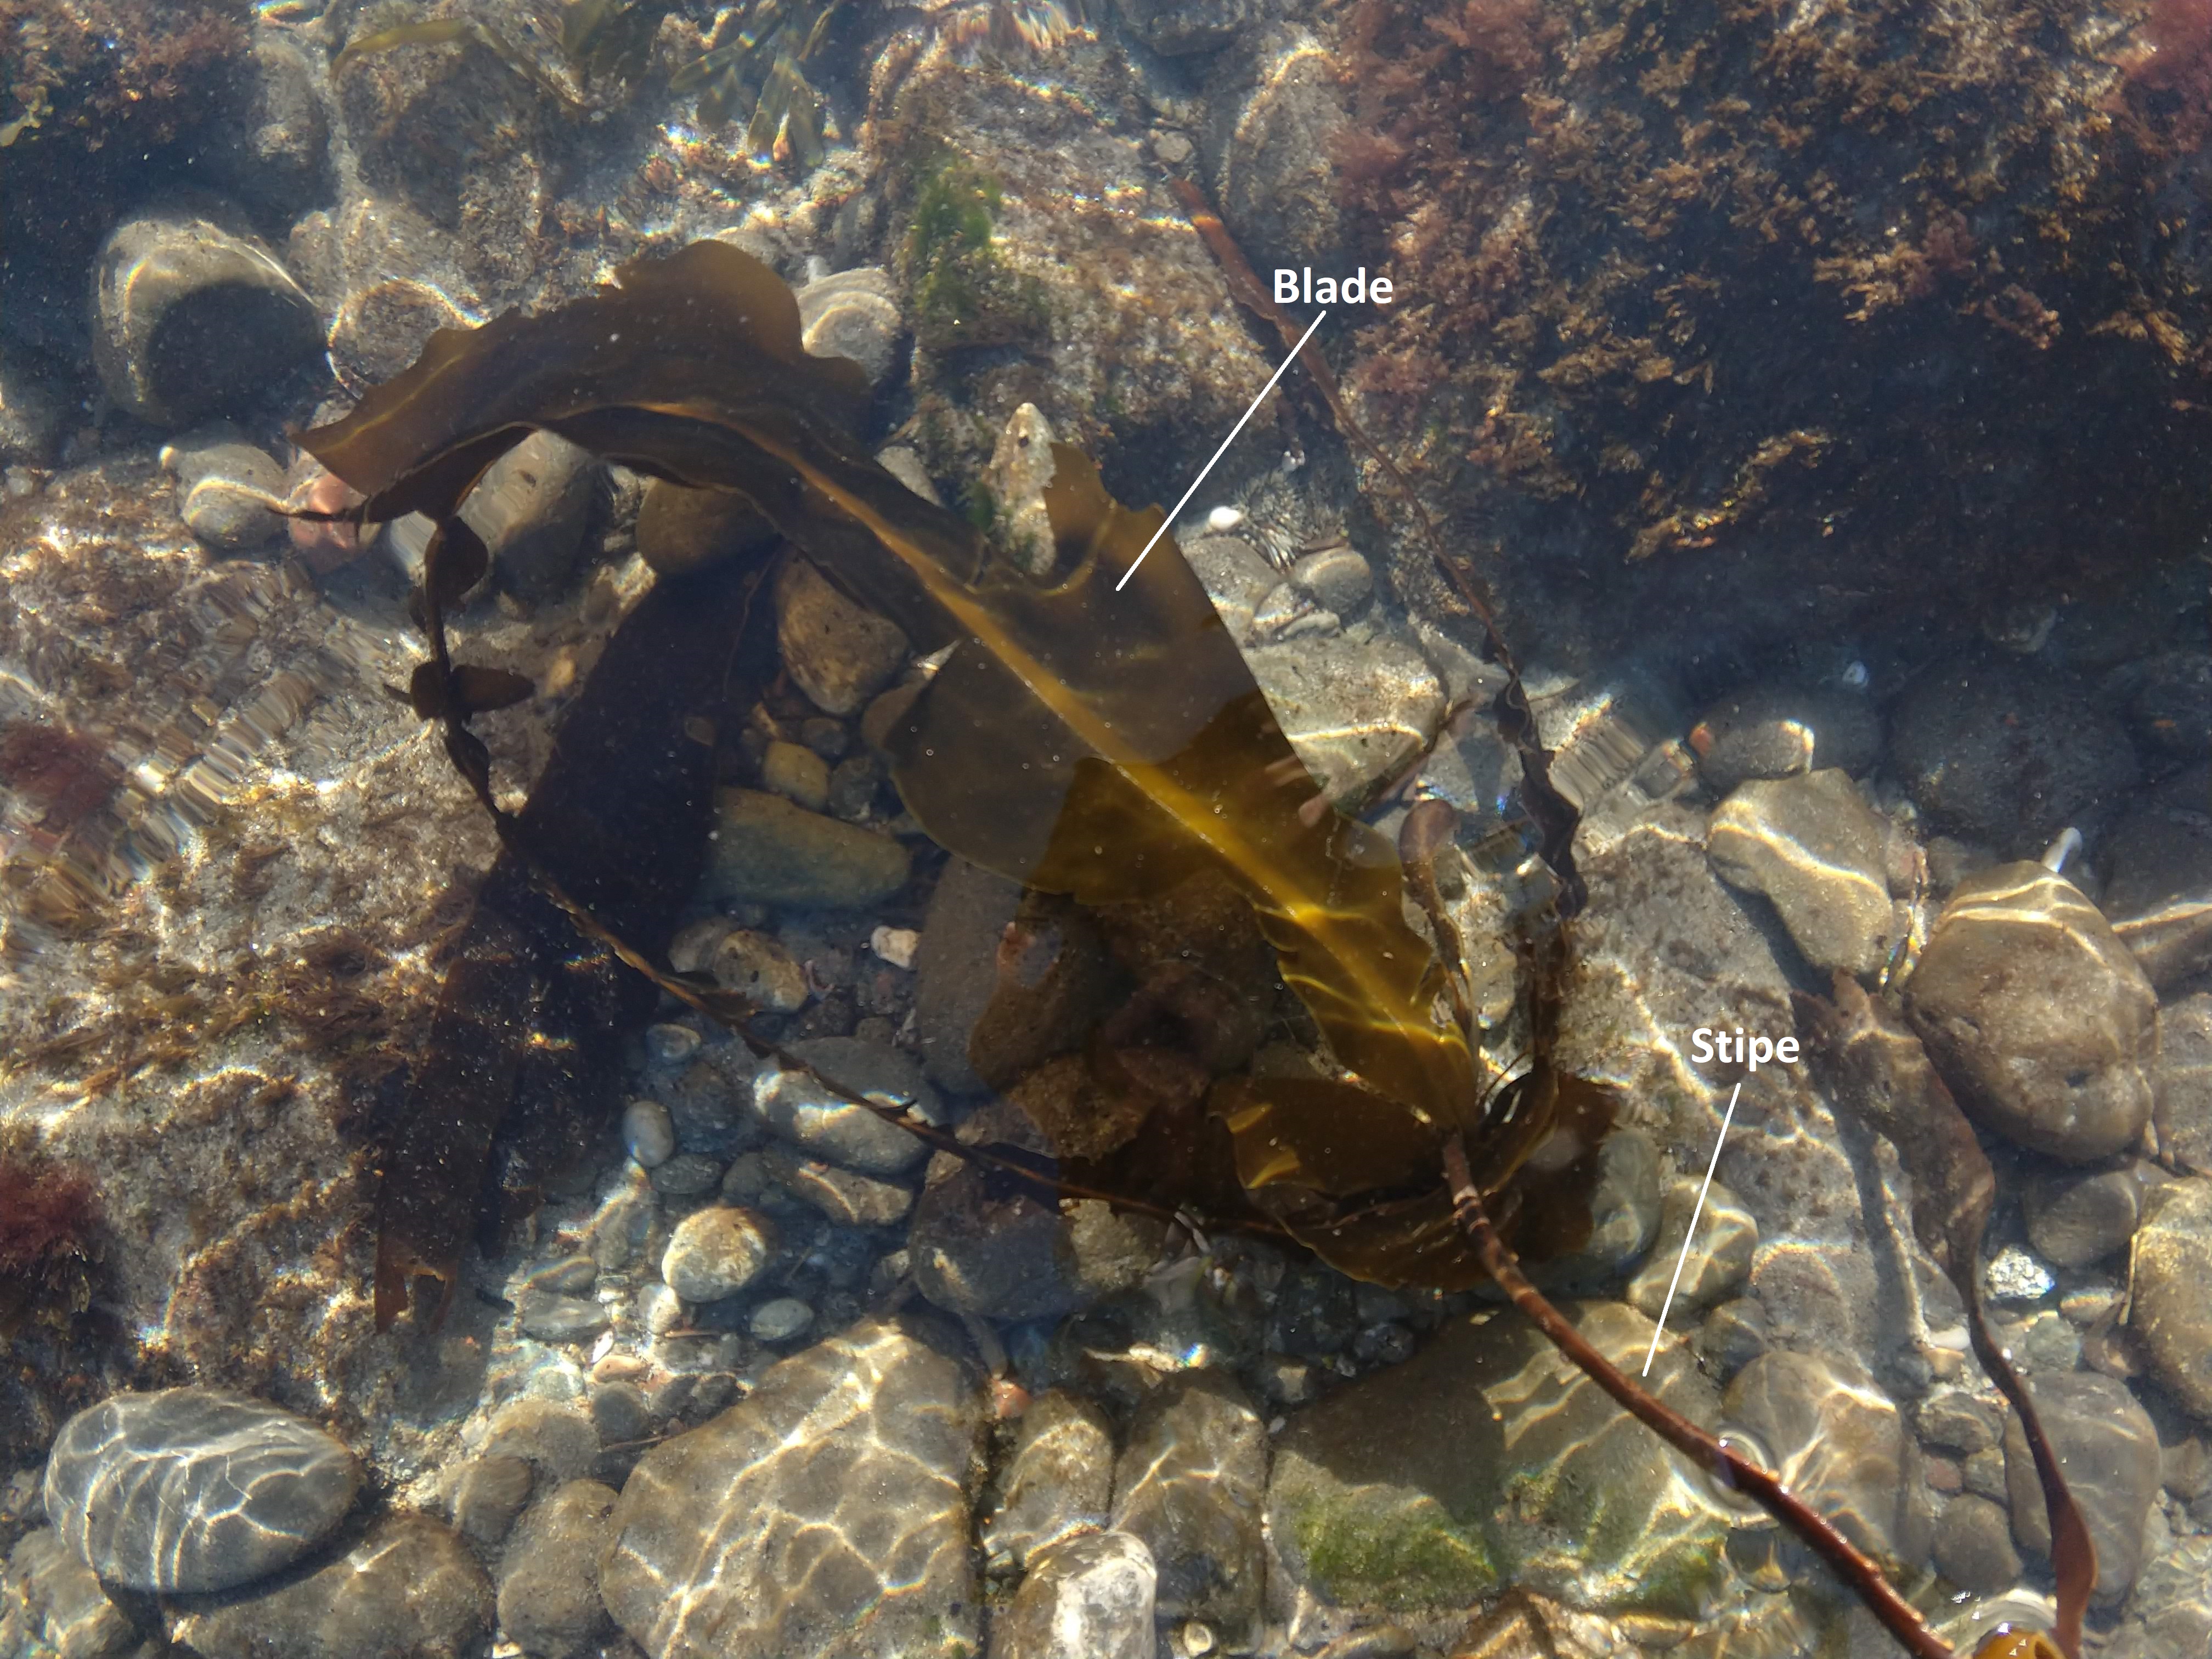 A kelp thallus with a single large blade